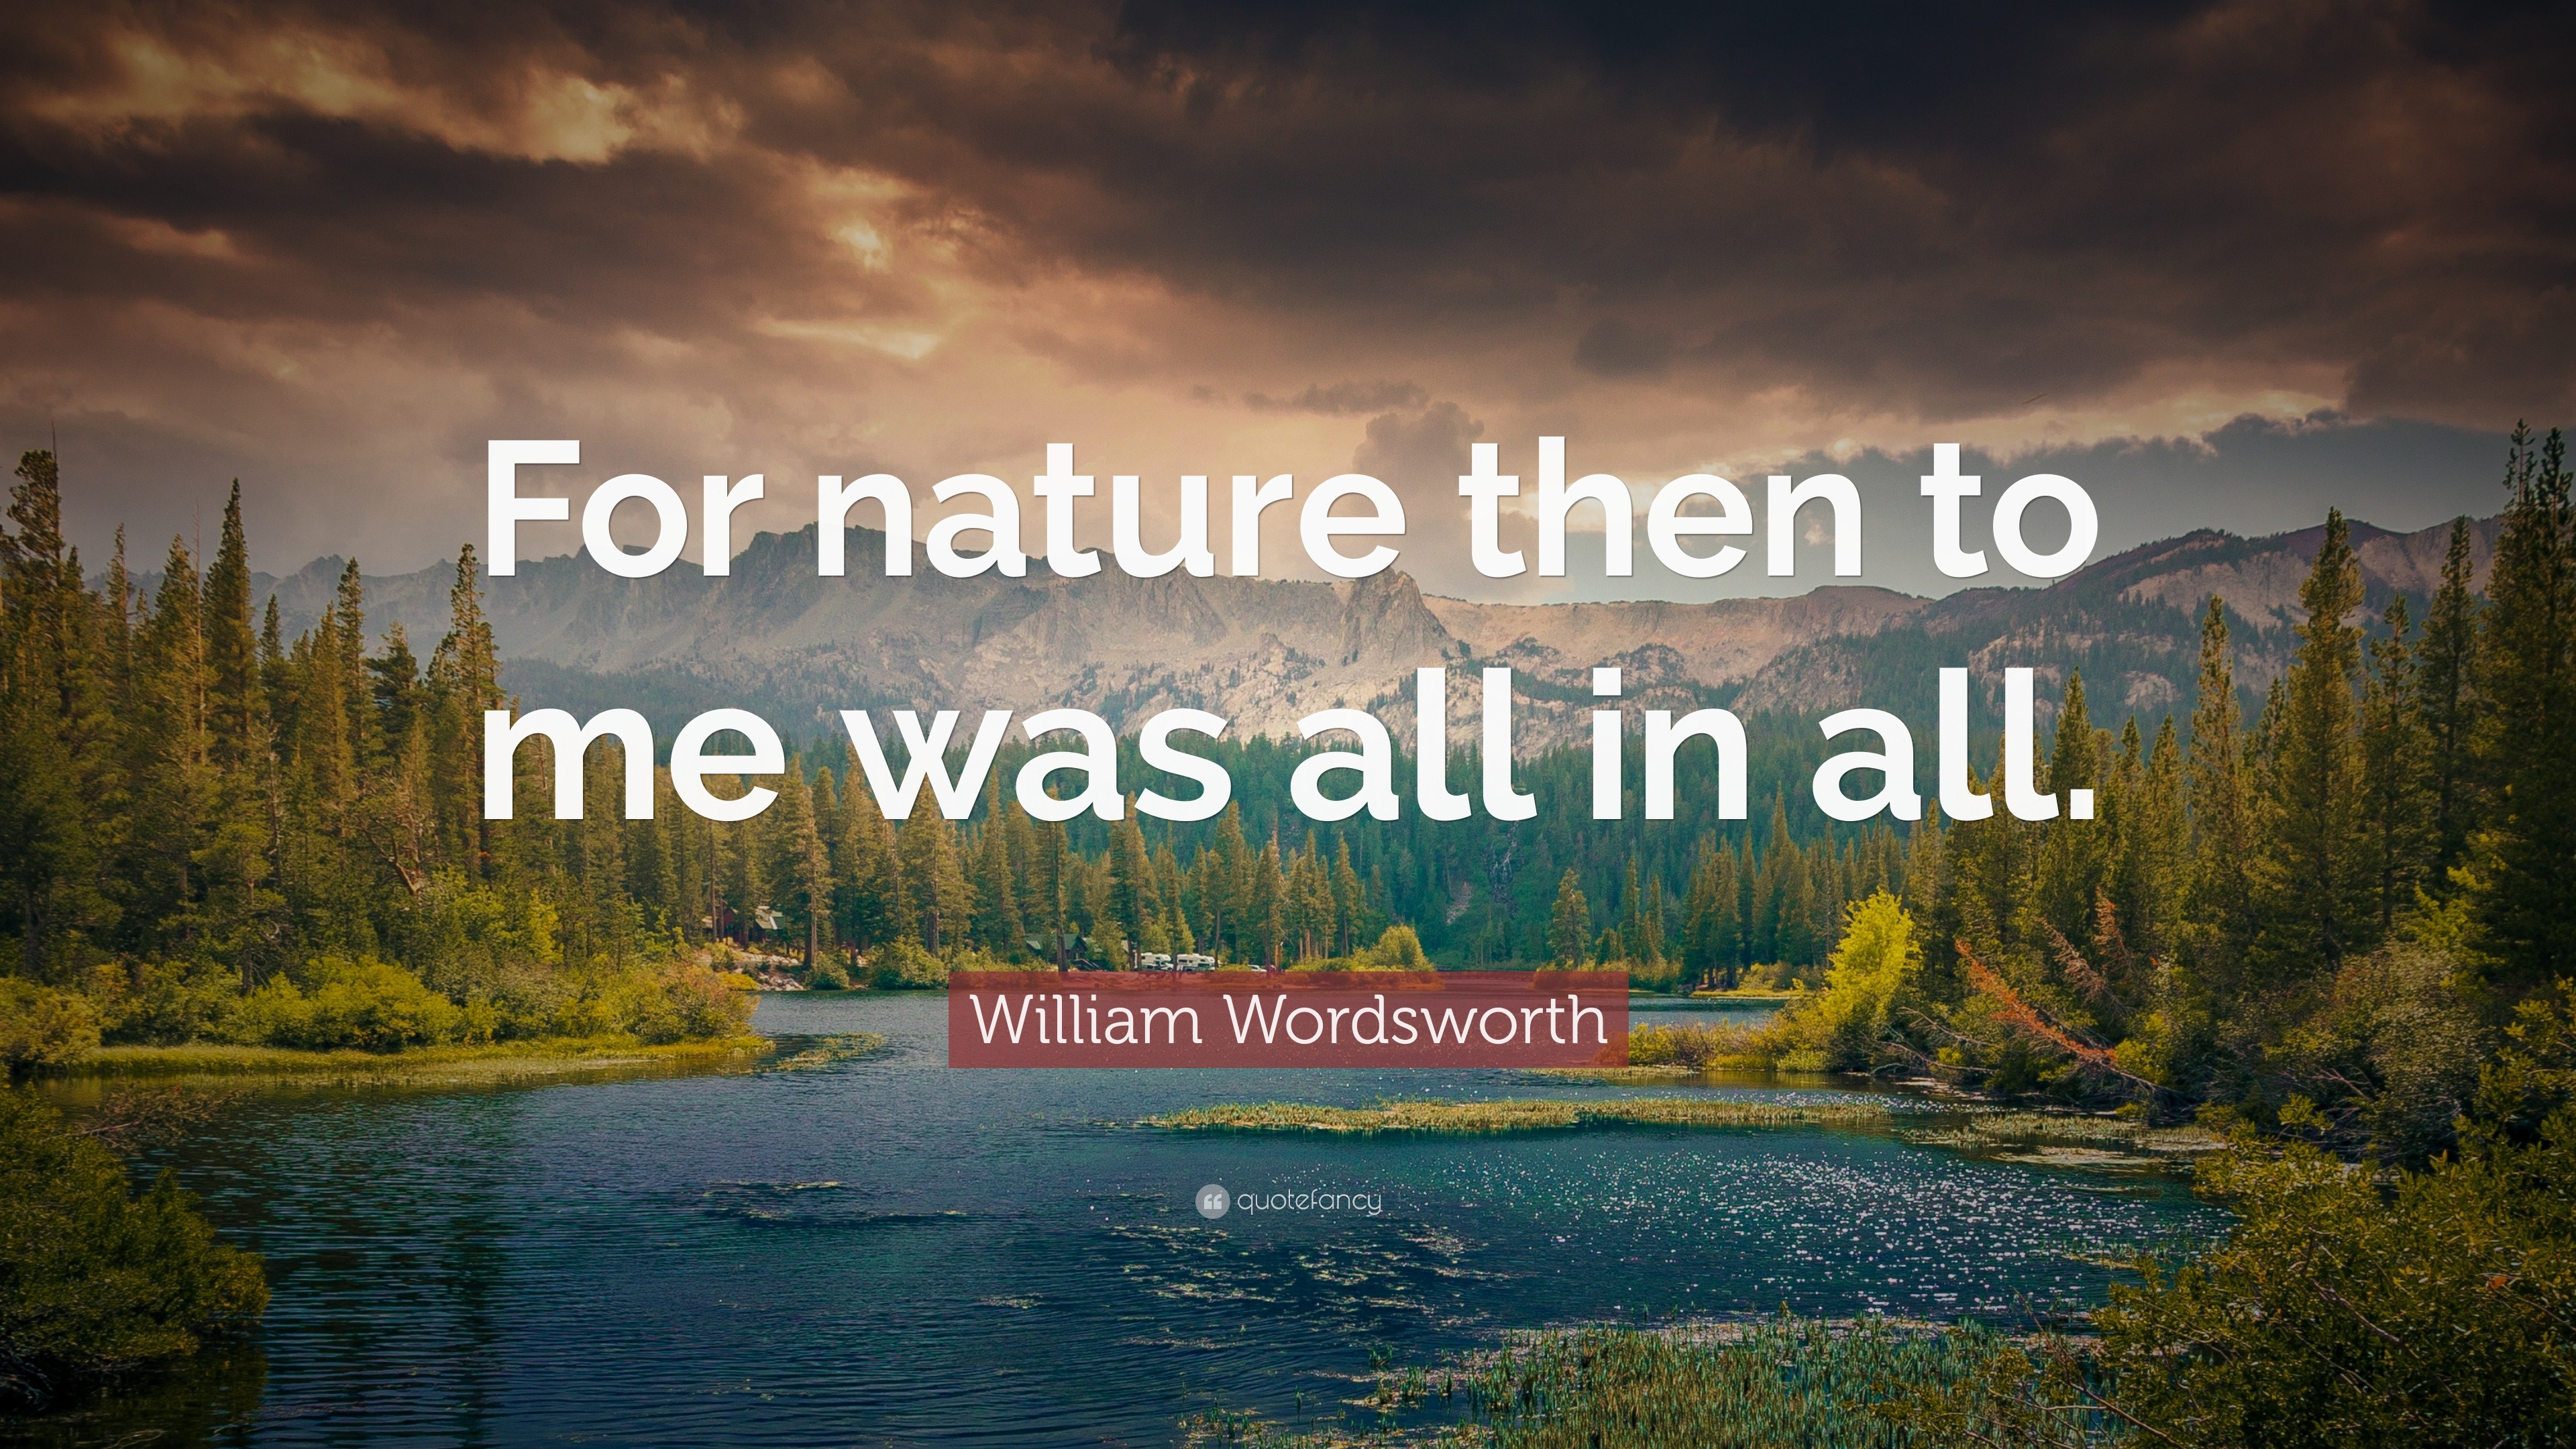 William Wordsworth Quote: nature then me was all in all.”